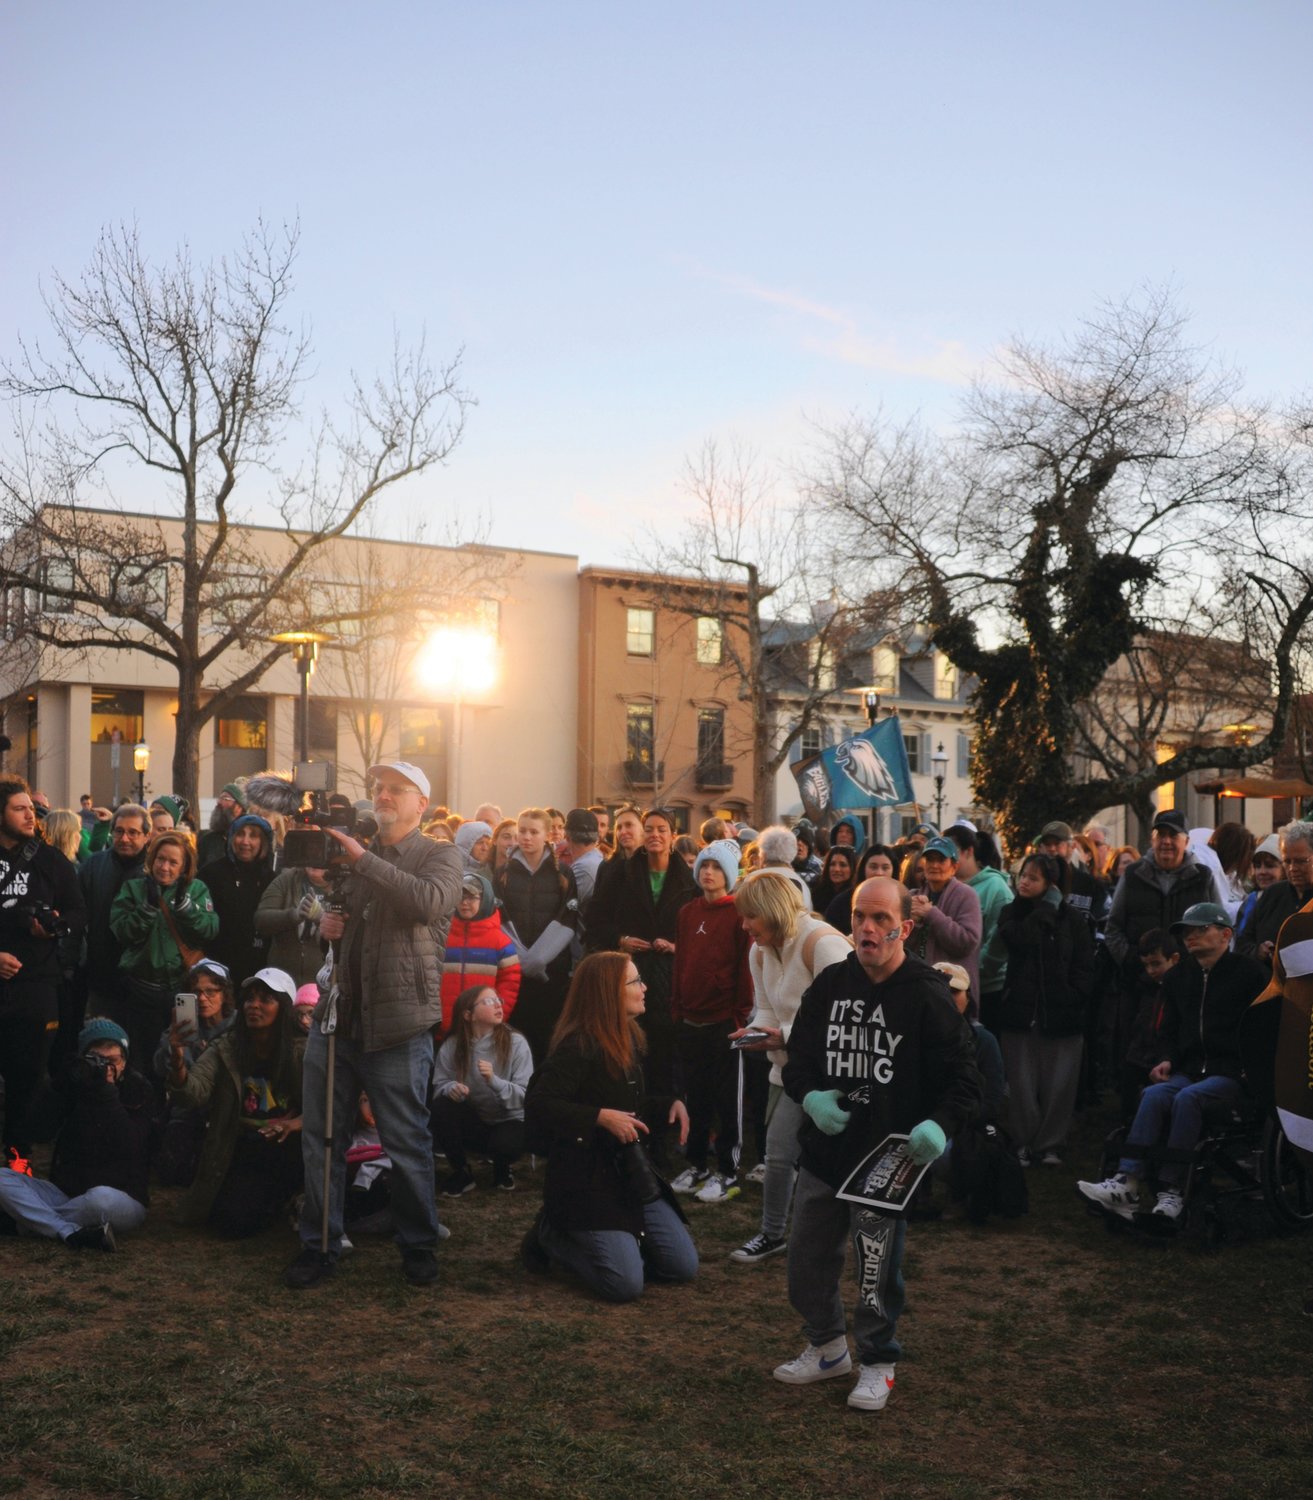 The sun sets at the tail end of the Herald’s “Bucks County Loves the Birds” pep rally on the lawn of the old county courthouse in Doylestown Friday evening. The event drew hundreds of residents to the county seat to kick off Super Bowl weekend.